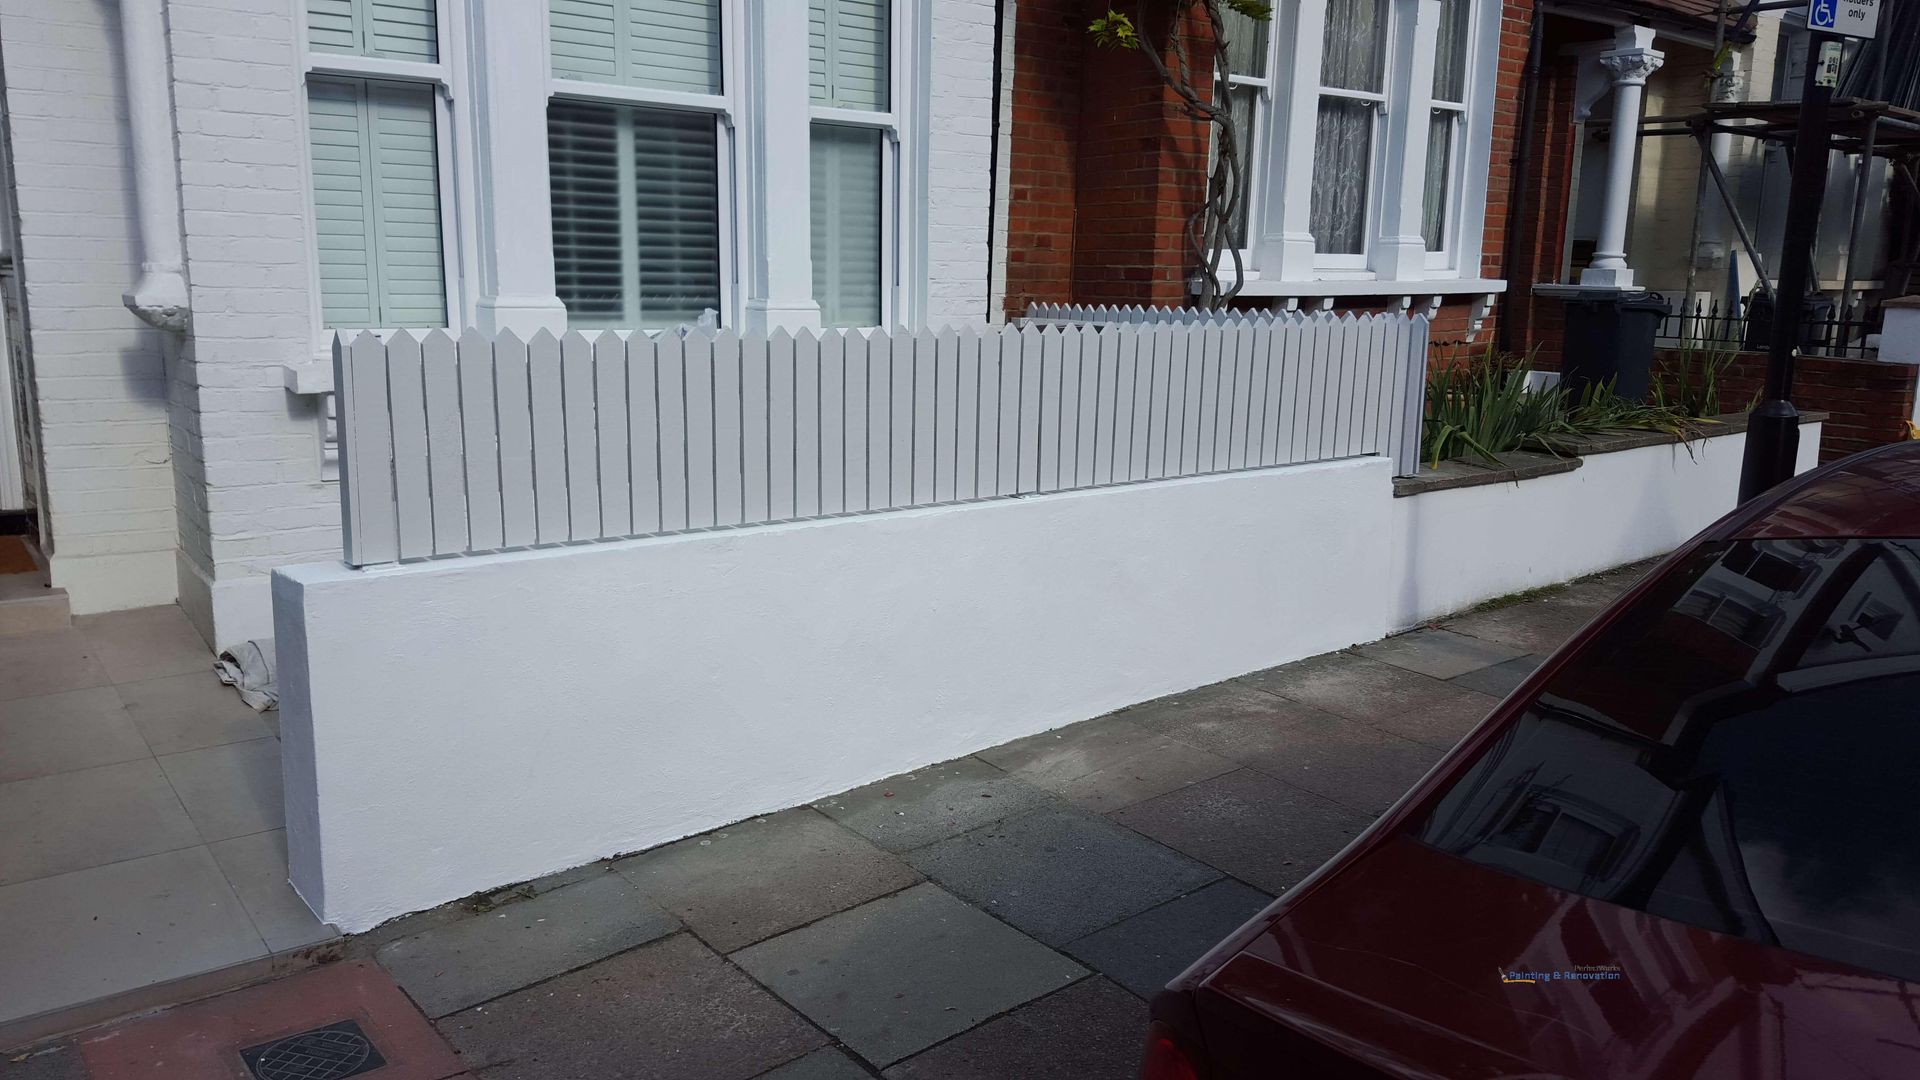 Exterior Painting in Kensington PerfectWorks Painting & Renovation 房子 exterior painting,paiting services,painting contractor